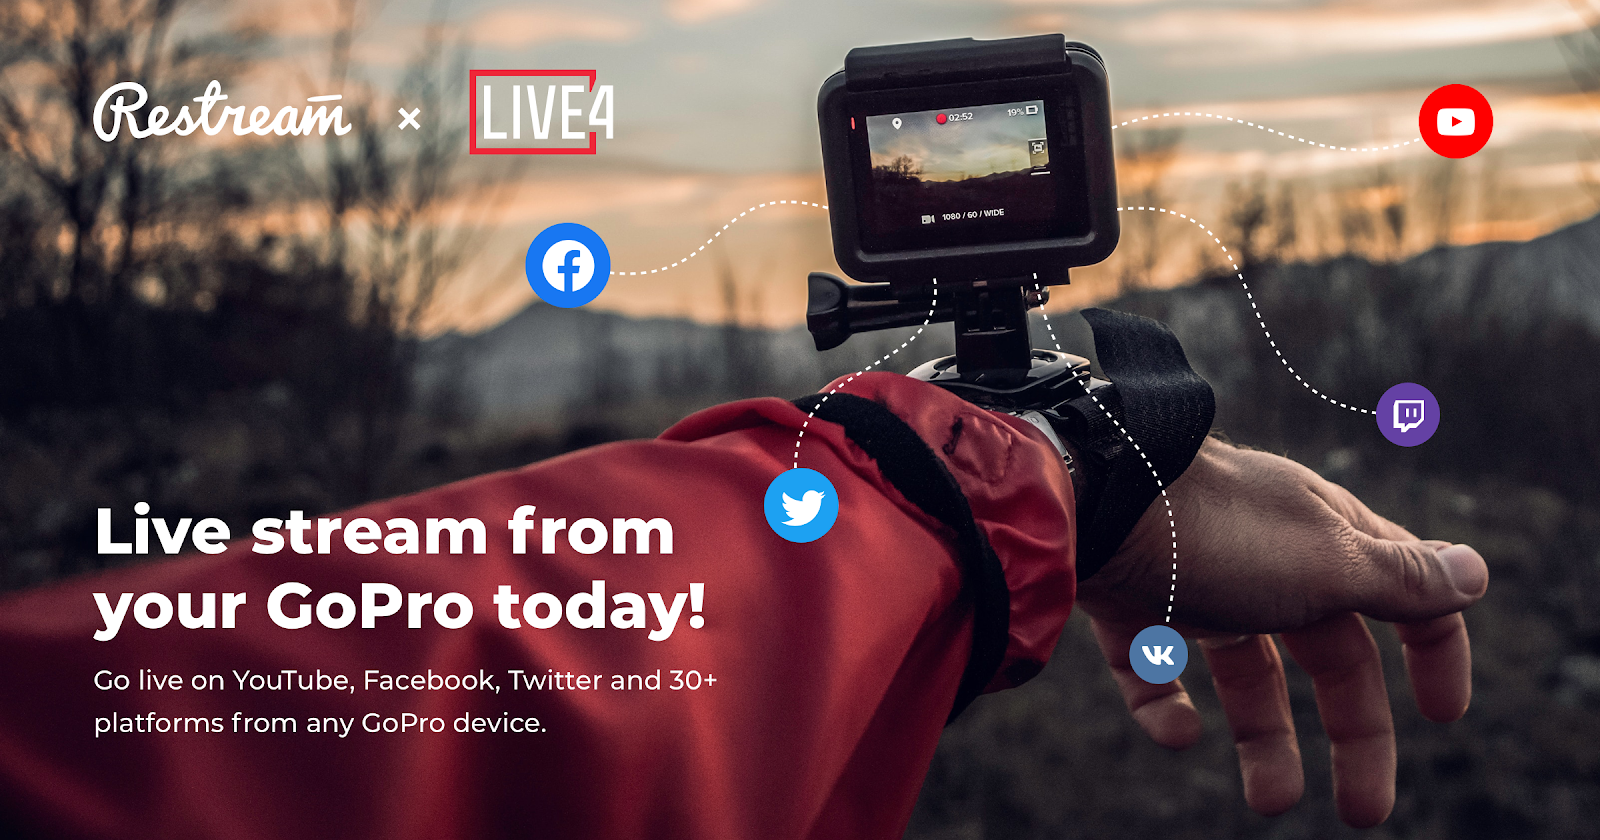 LIVE4 Introduces Multistreaming